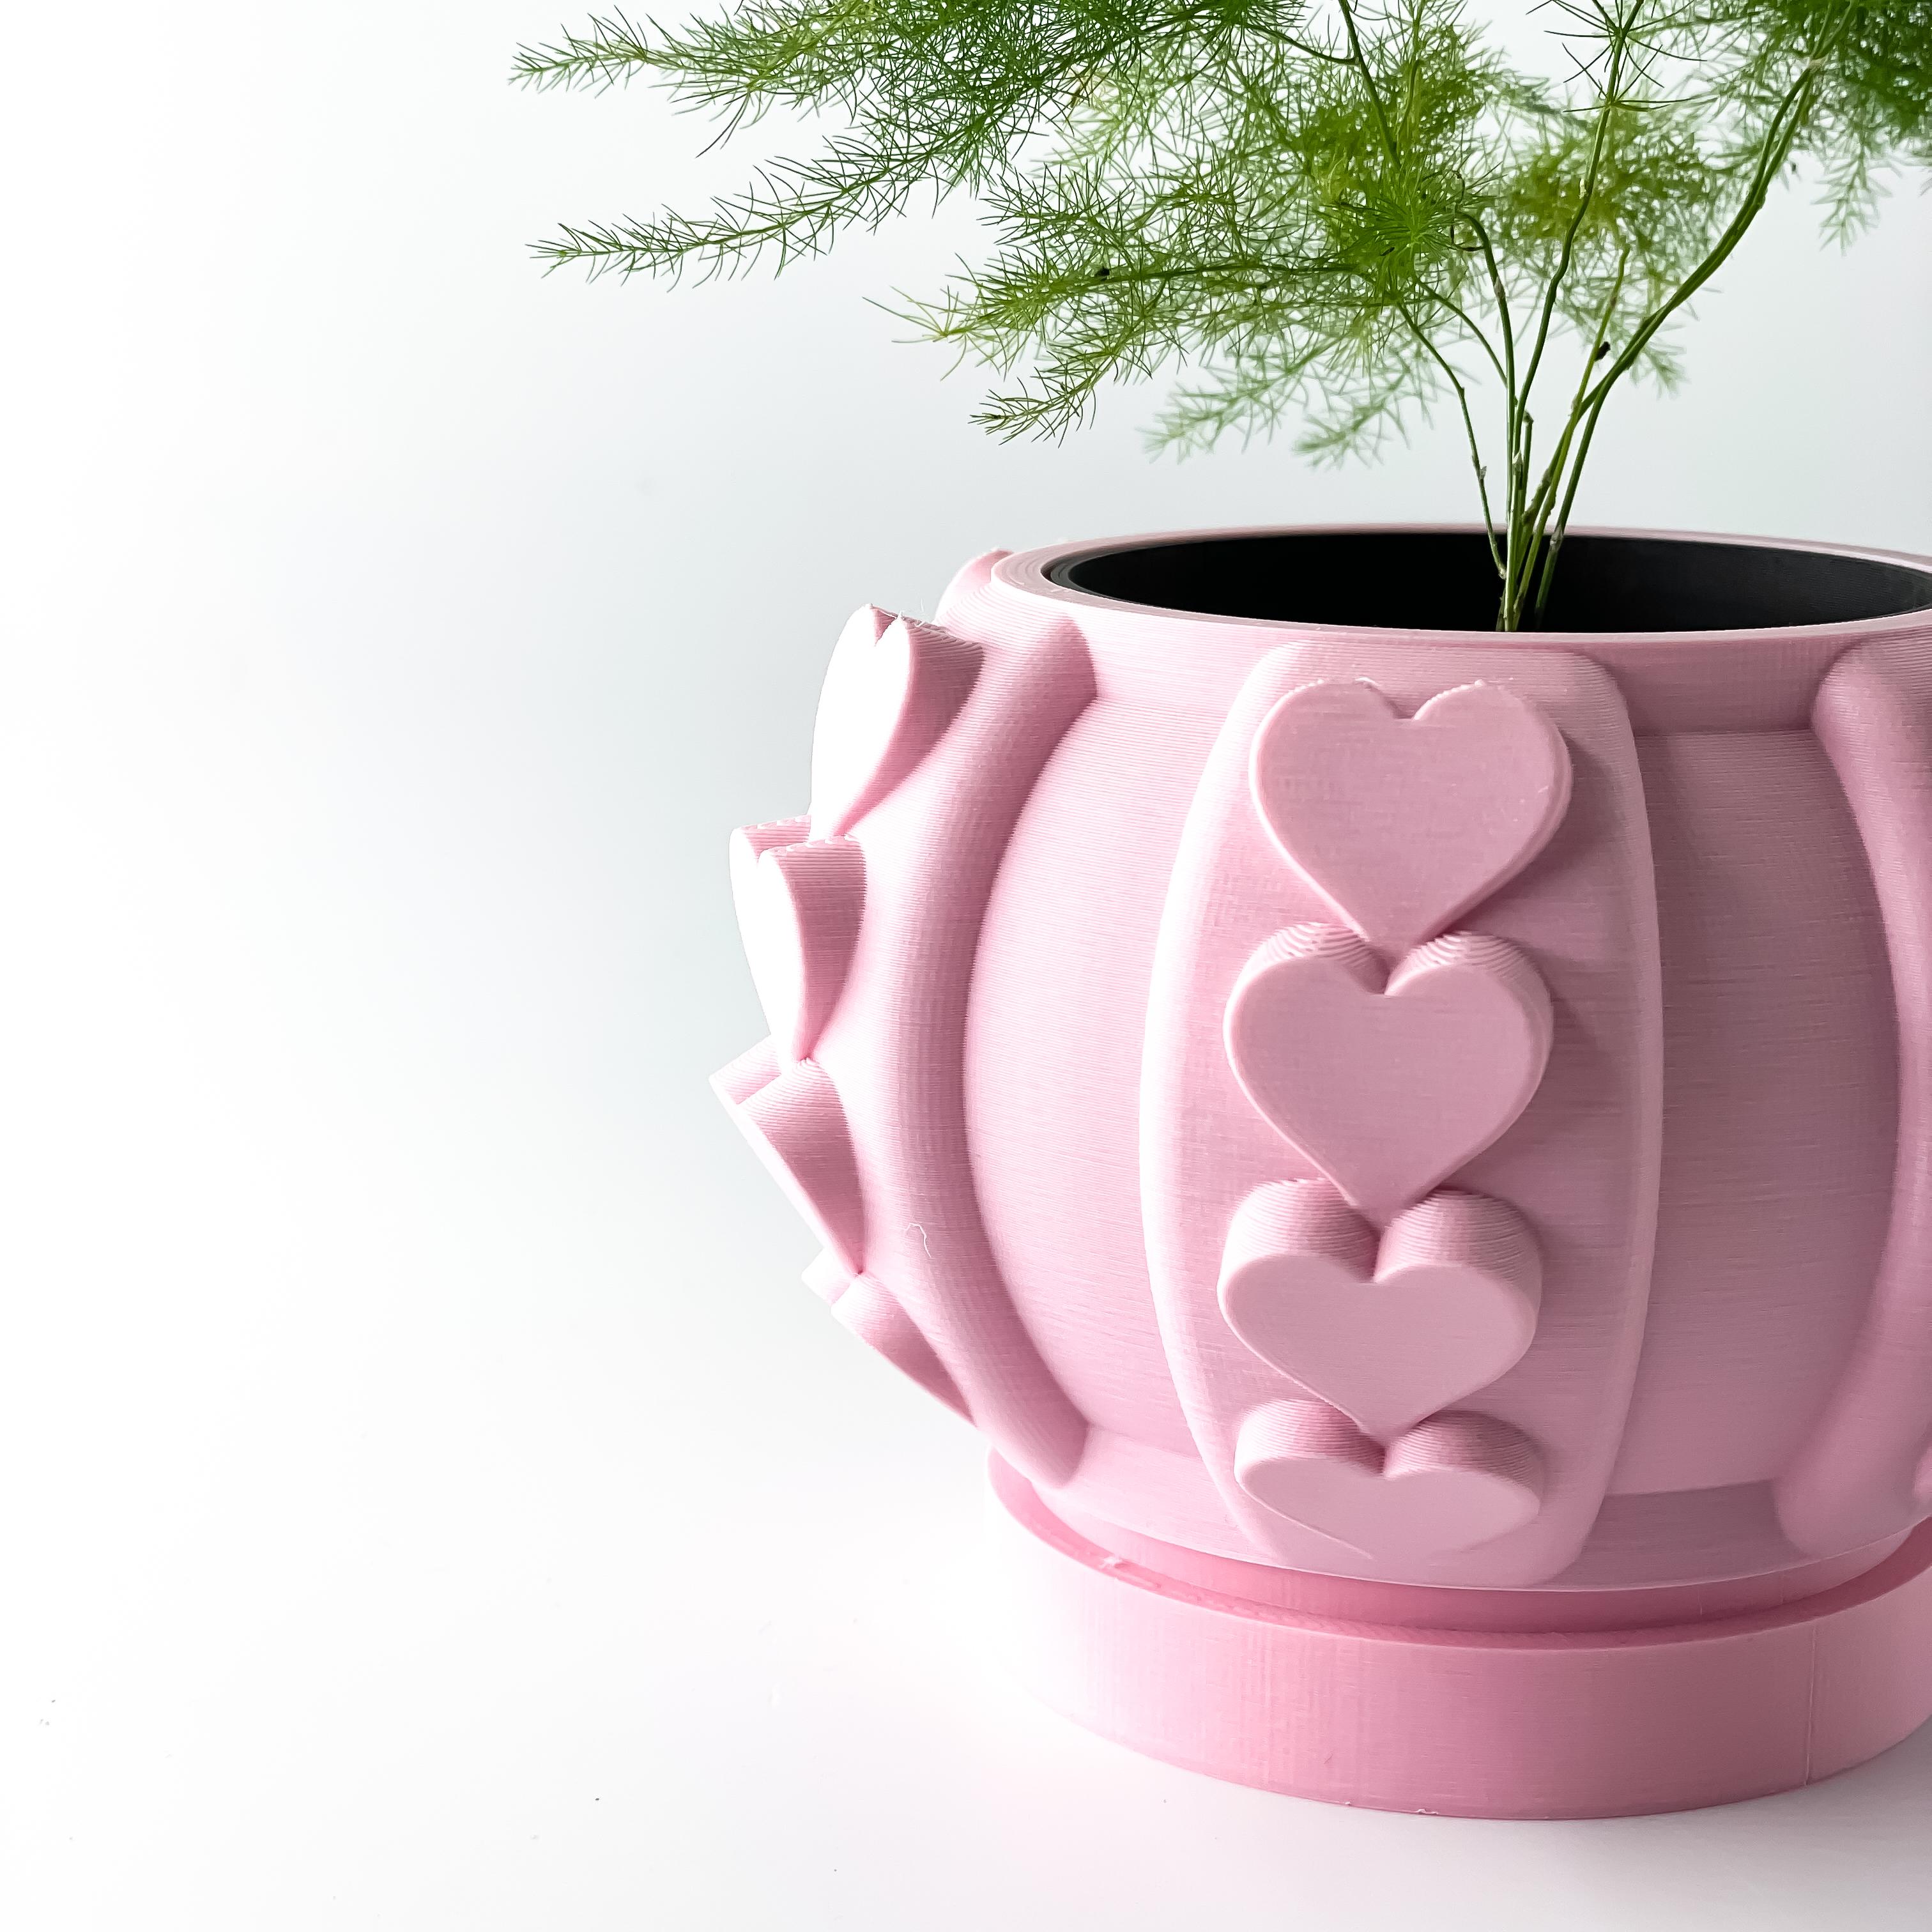 The Frenor Planter Pot with Drainage Tray & Stand | Modern and Unique Home Decor for Plants 3d model